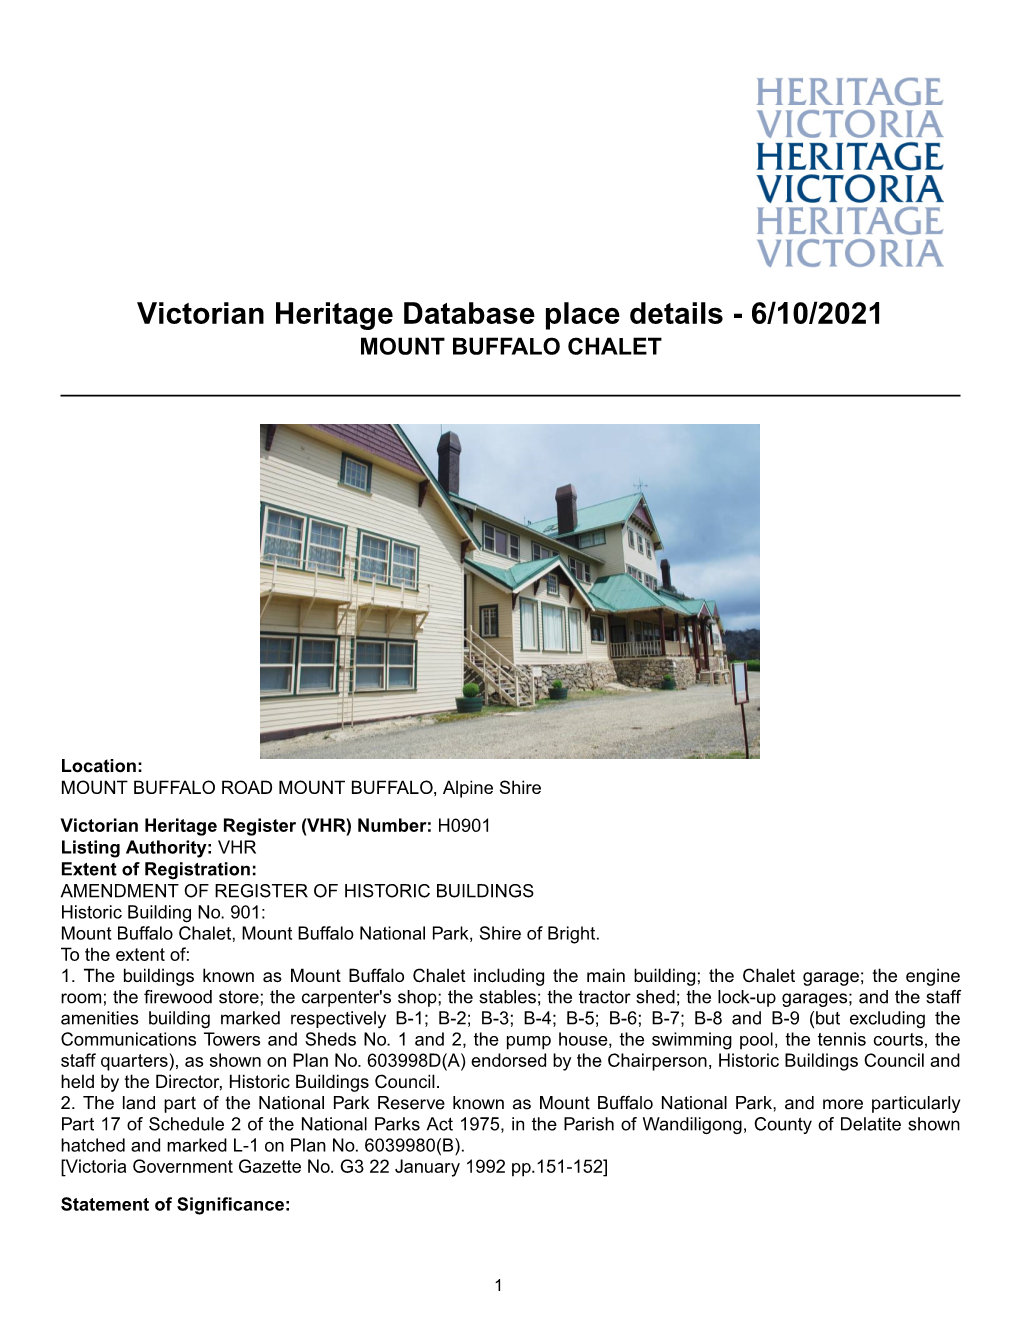 Victorian Heritage Database Place Details - 6/10/2021 MOUNT BUFFALO CHALET